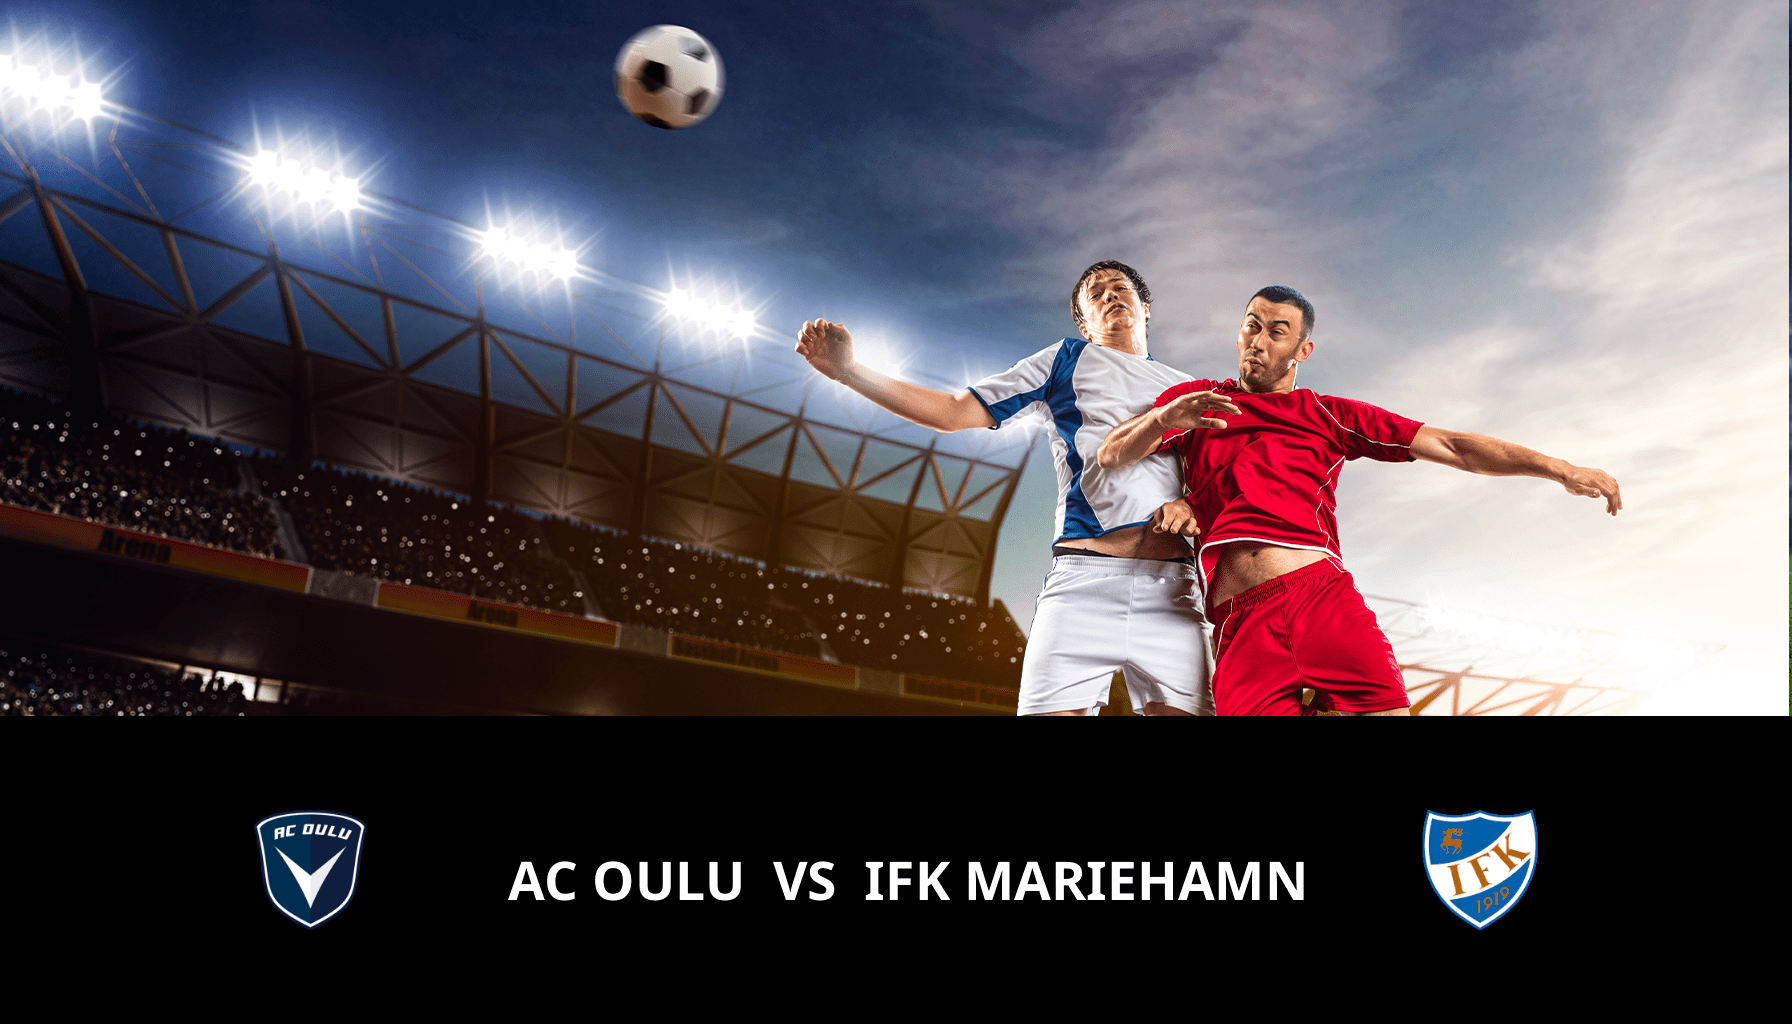 Previsione per AC oulu VS IFK Mariehamn il 17/05/2024 Analysis of the match